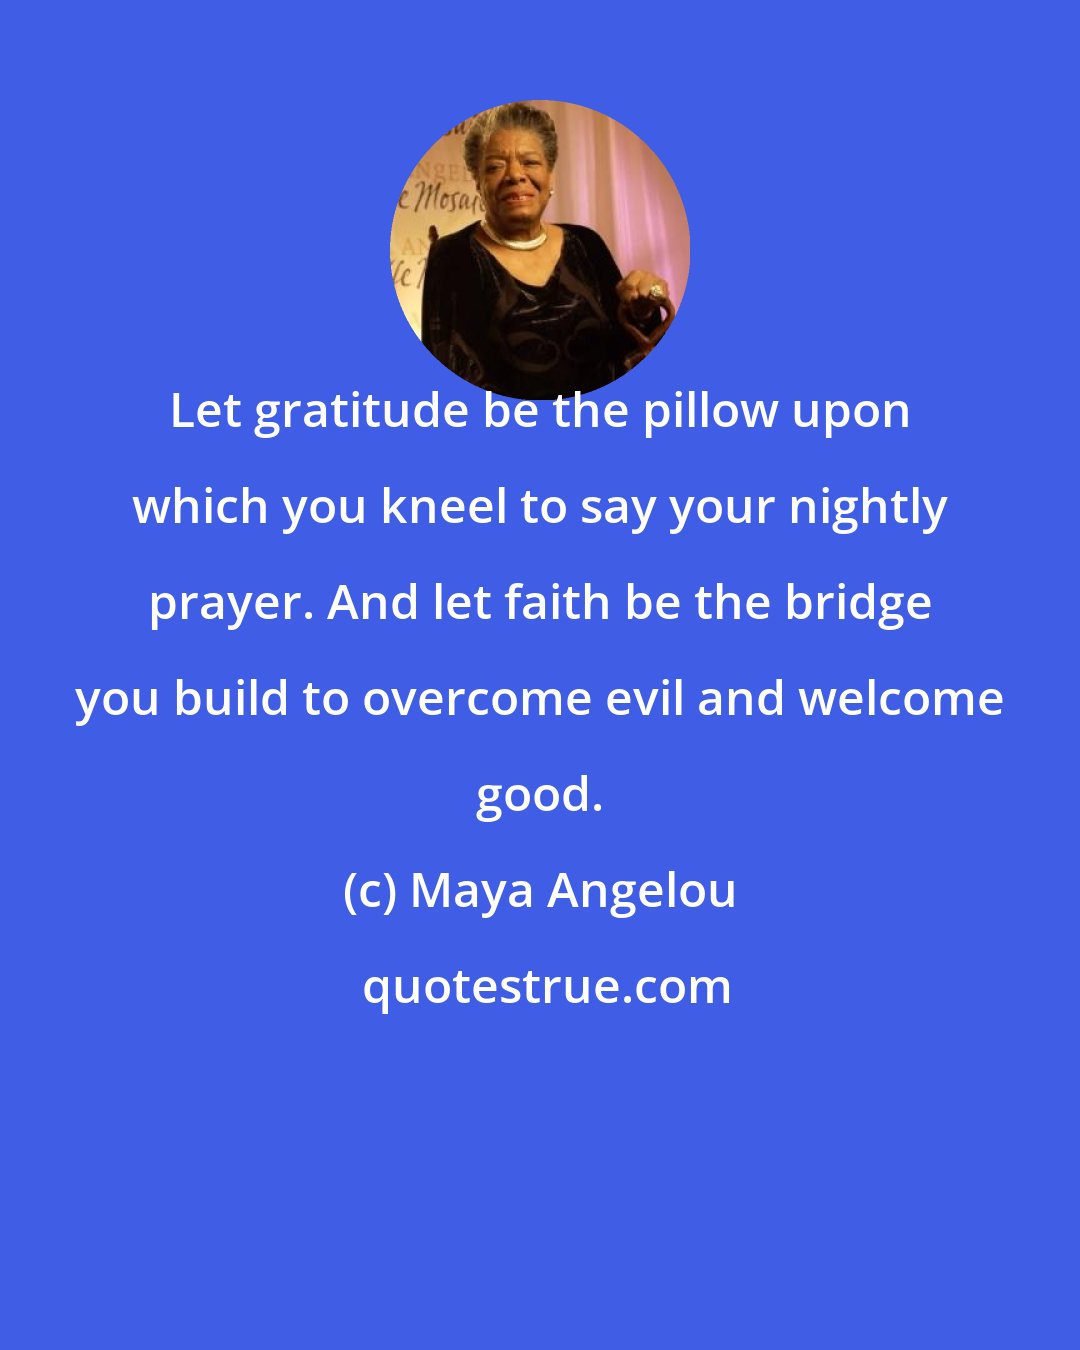 Maya Angelou: Let gratitude be the pillow upon which you kneel to say your nightly prayer. And let faith be the bridge you build to overcome evil and welcome good.